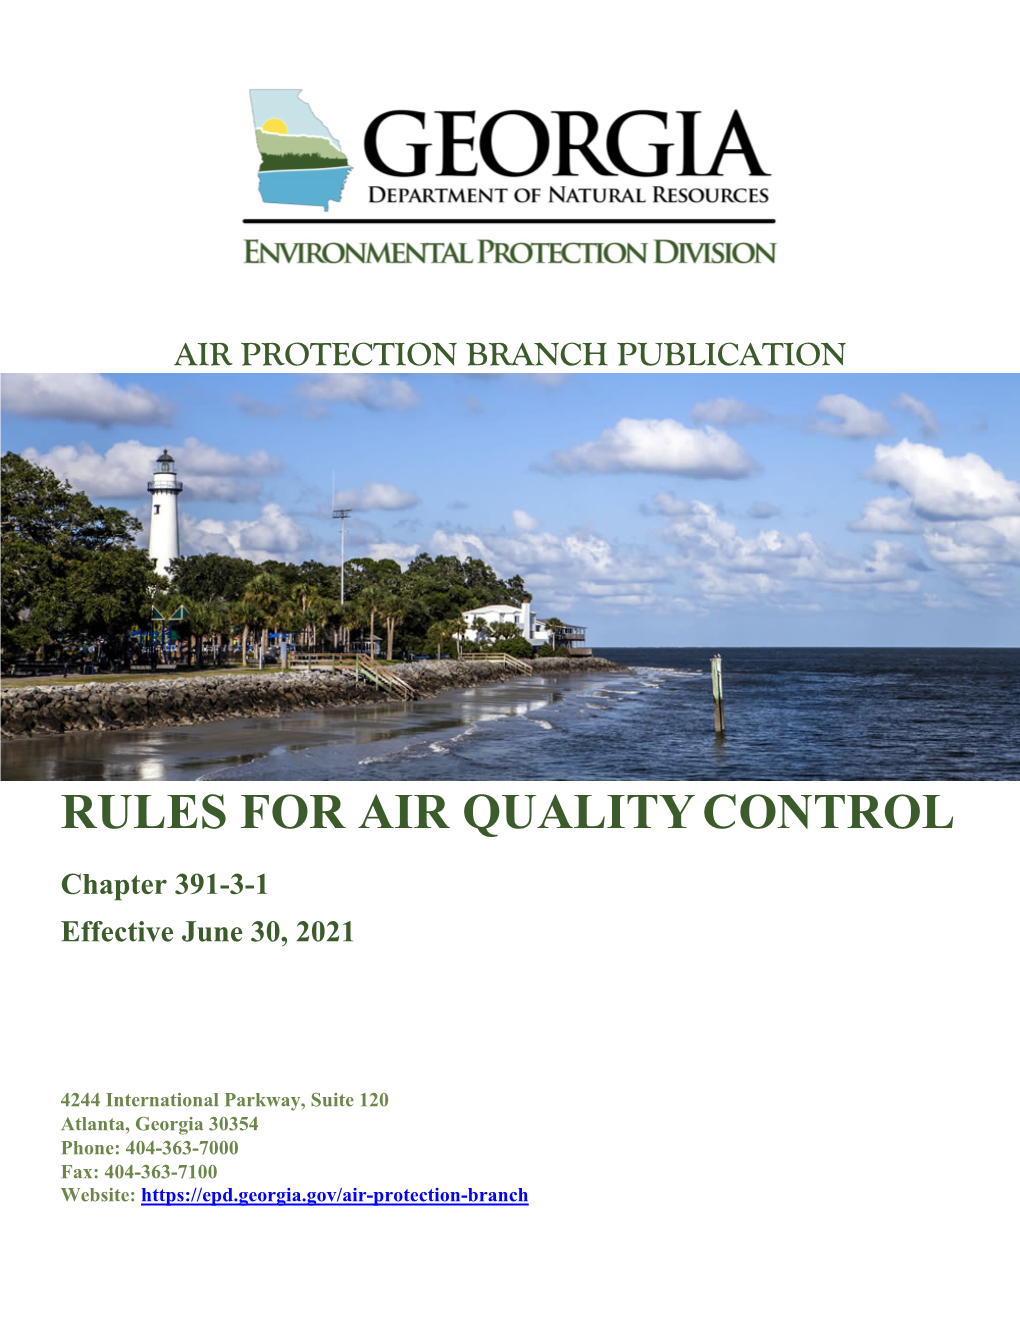 RULES for AIR QUALITY CONTROL Chapter 391-3-1 Effective June 30, 2021